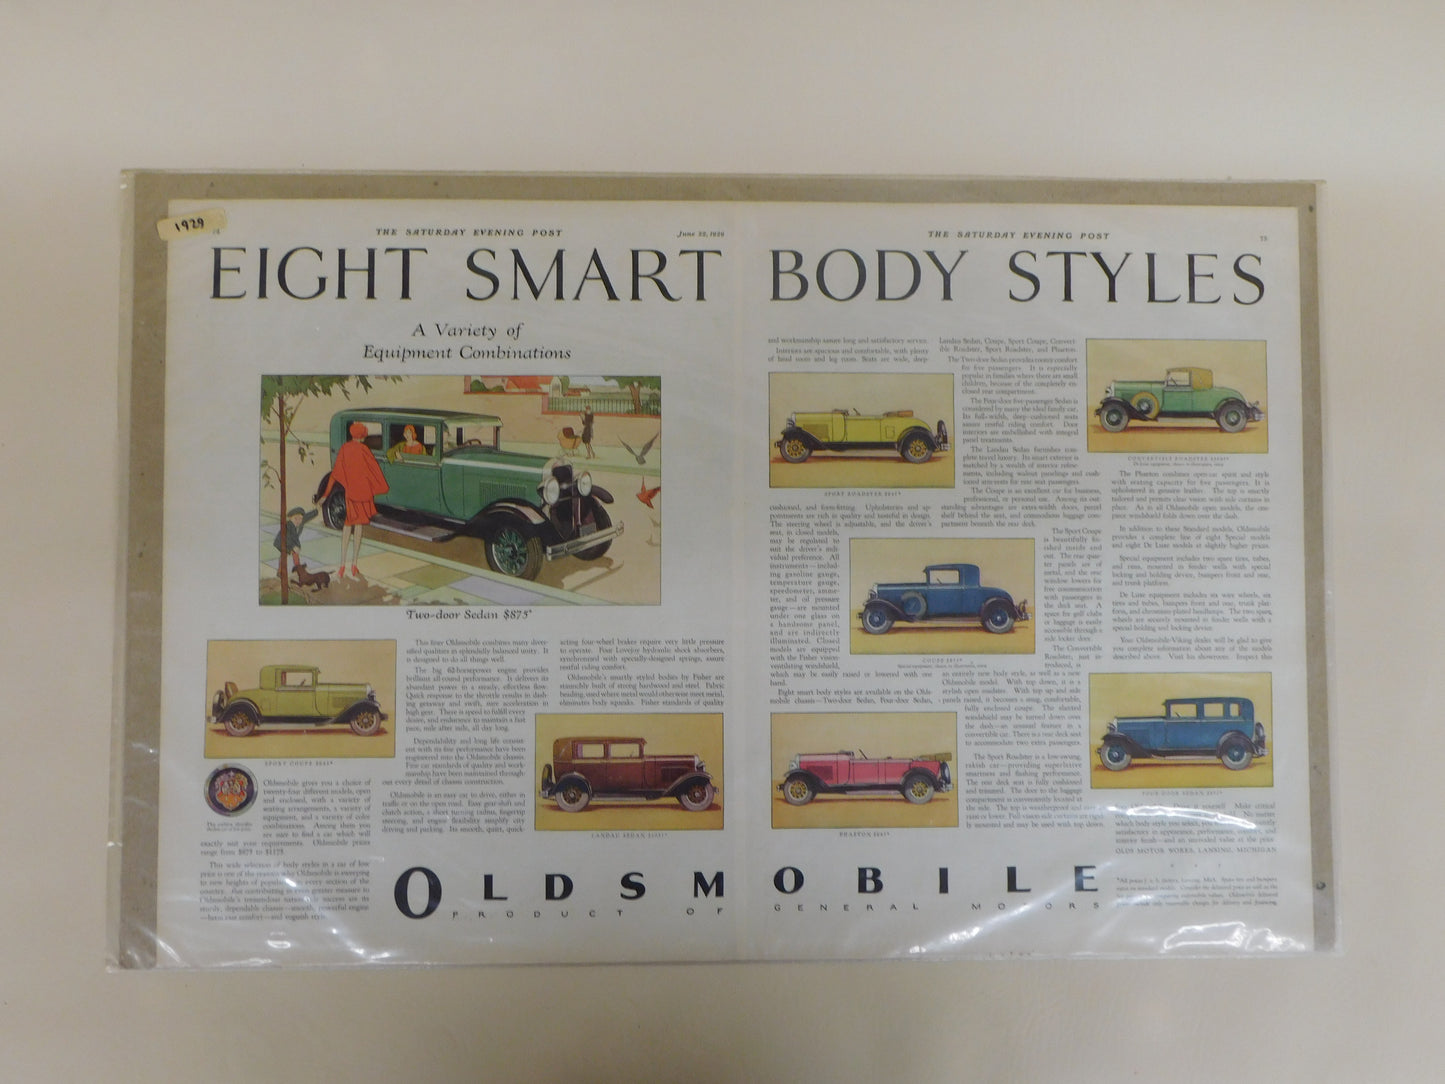 Classic Automotive Advertising - Contact Us to See if We Have Your Make/Model